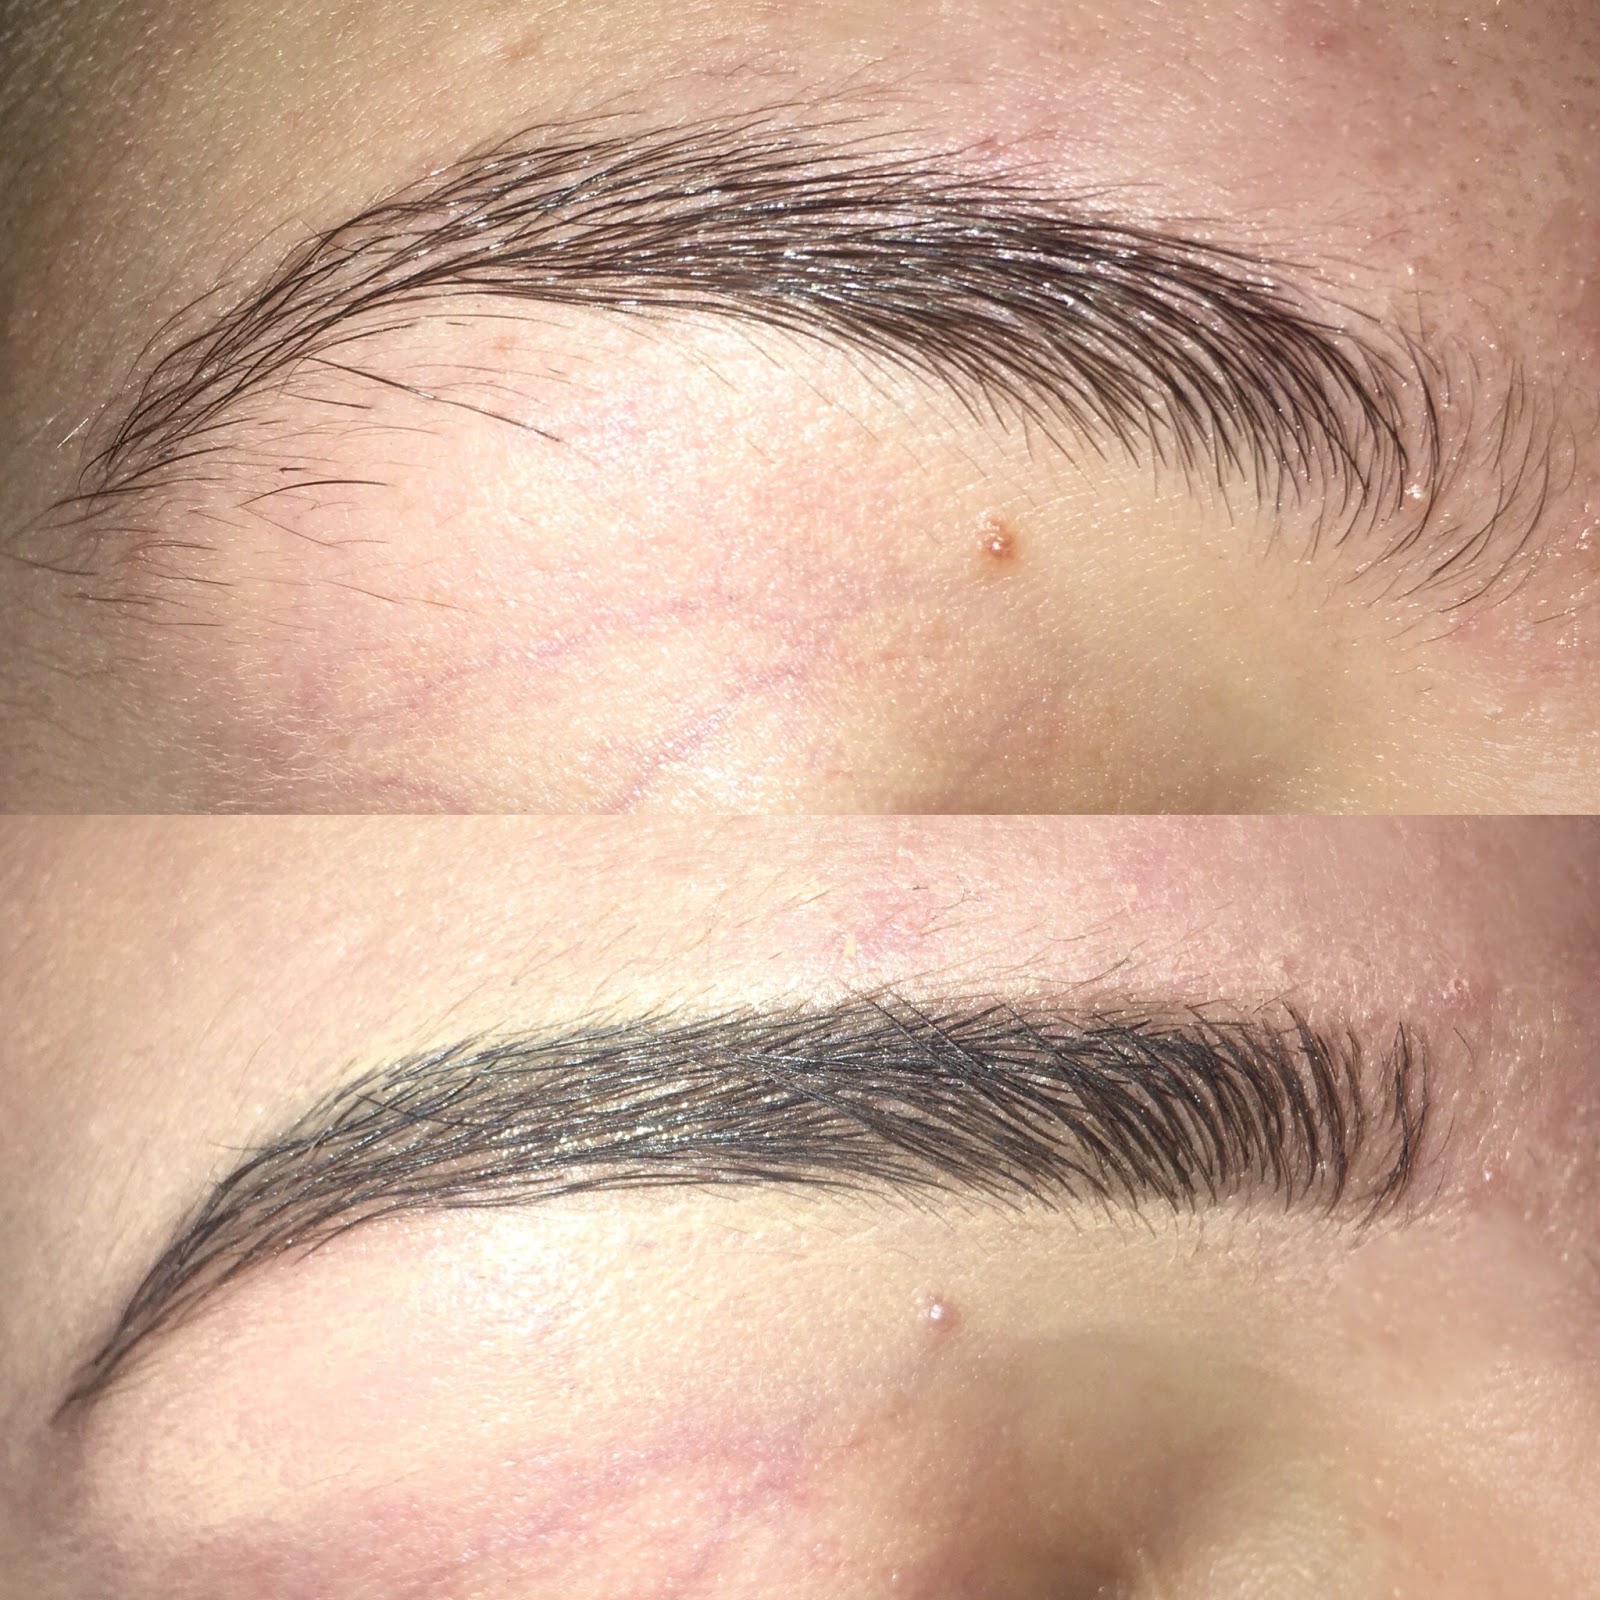 Places To Get Your Eyebrows Done Near Me - Eyebrow Poster